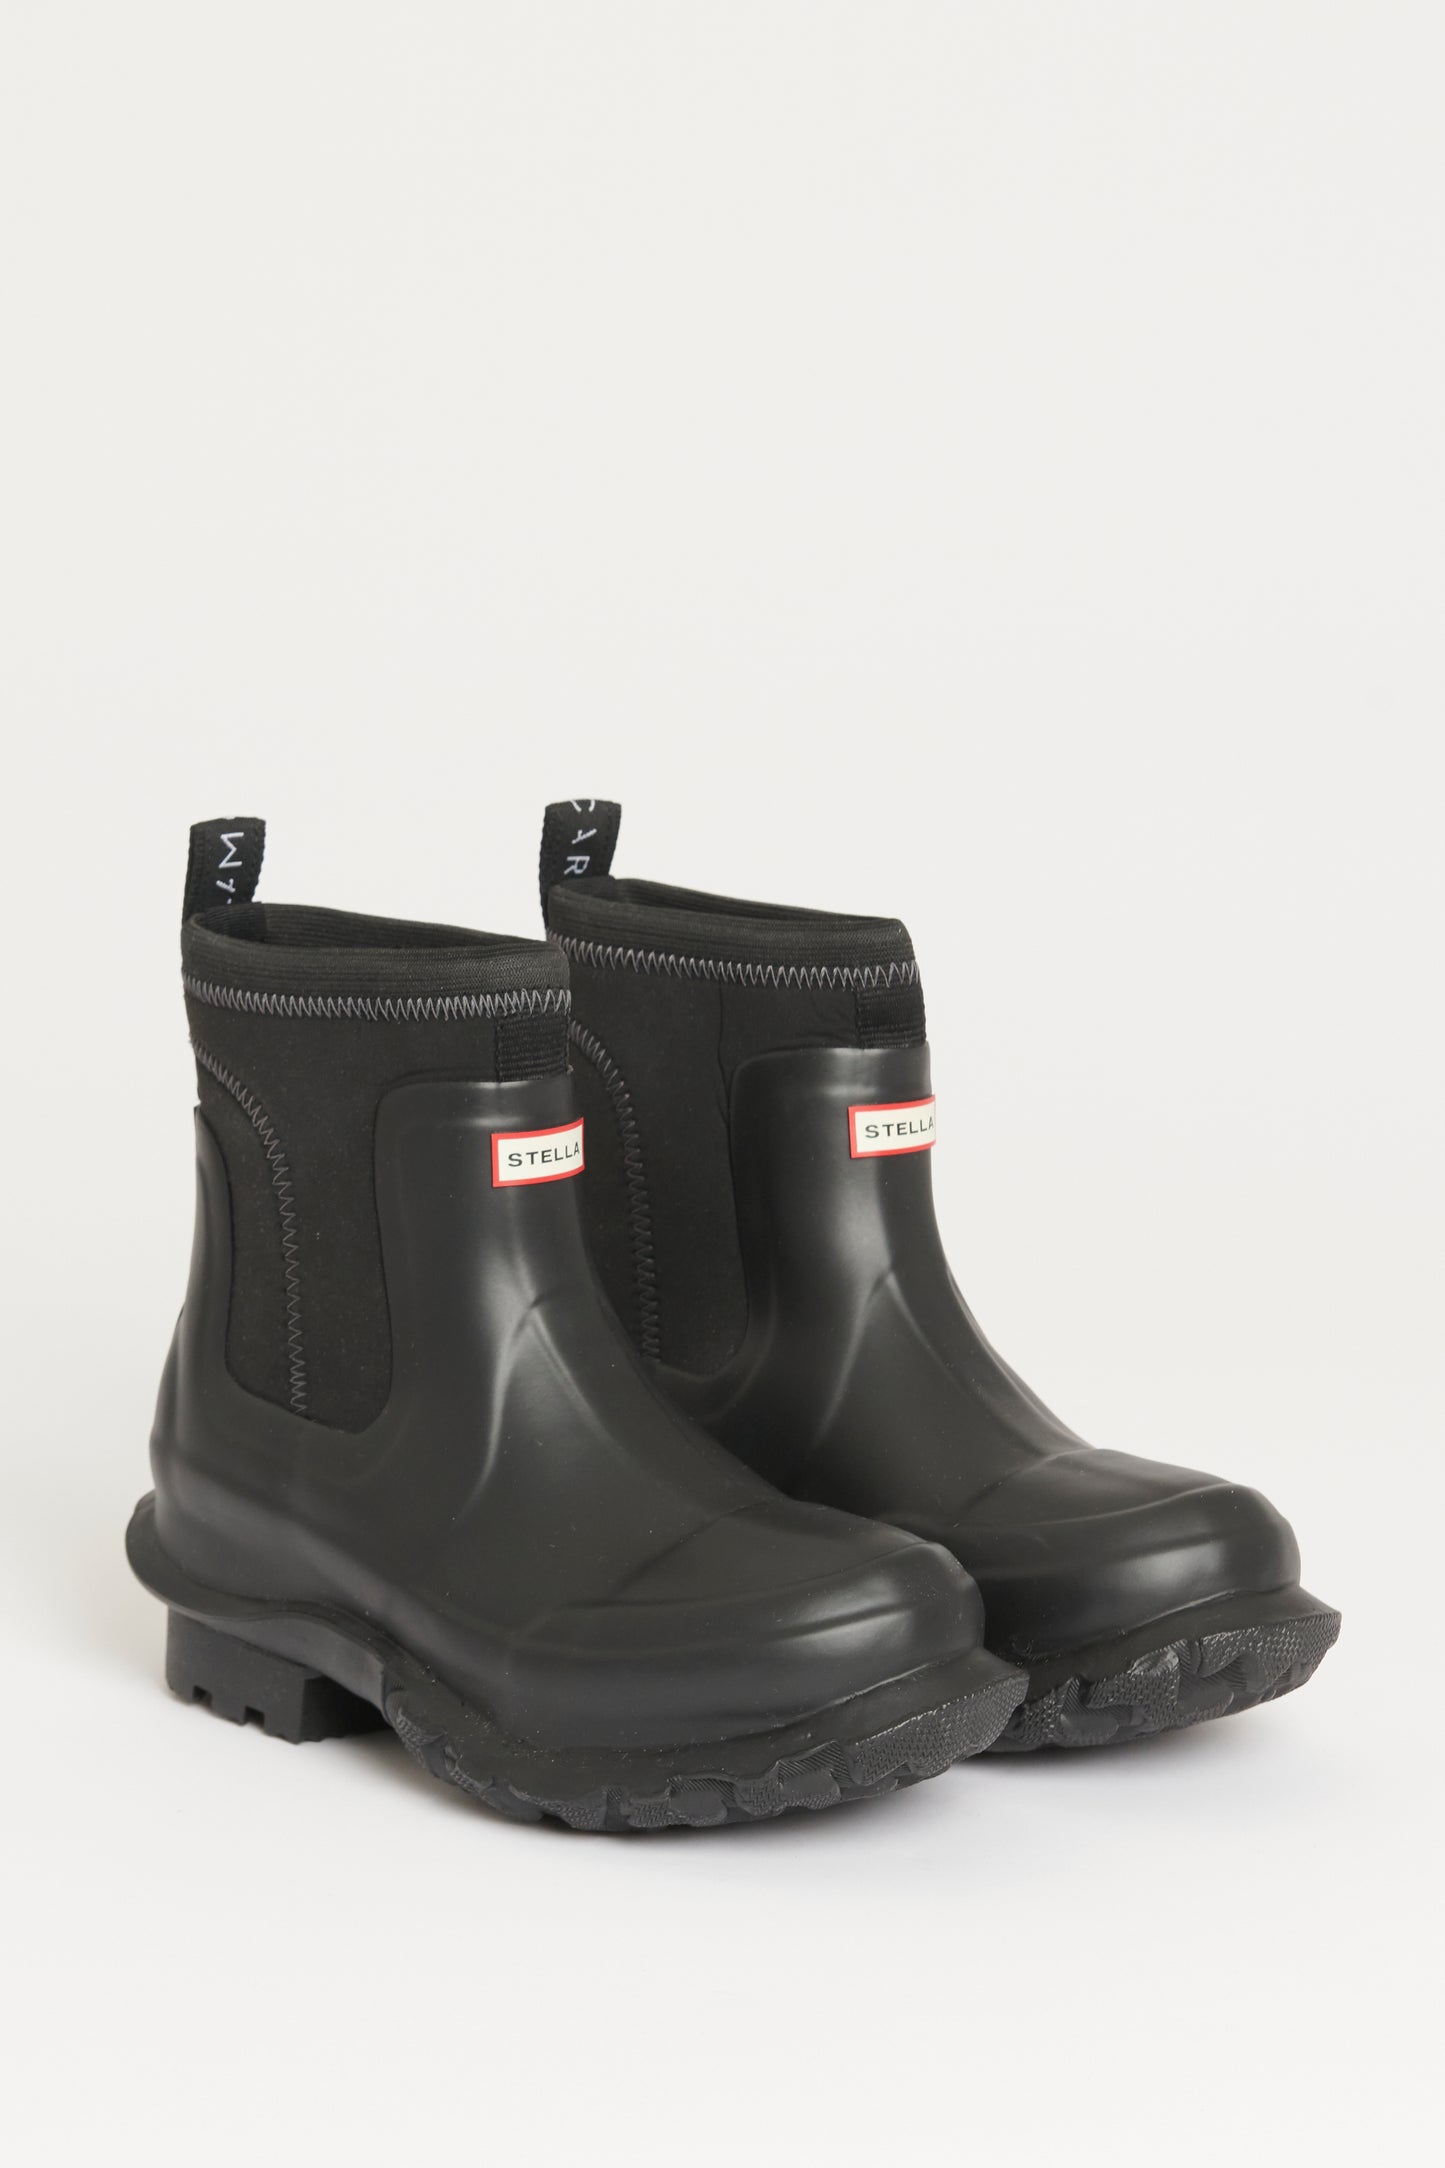 Black Rubber Preowned Hunter Boots